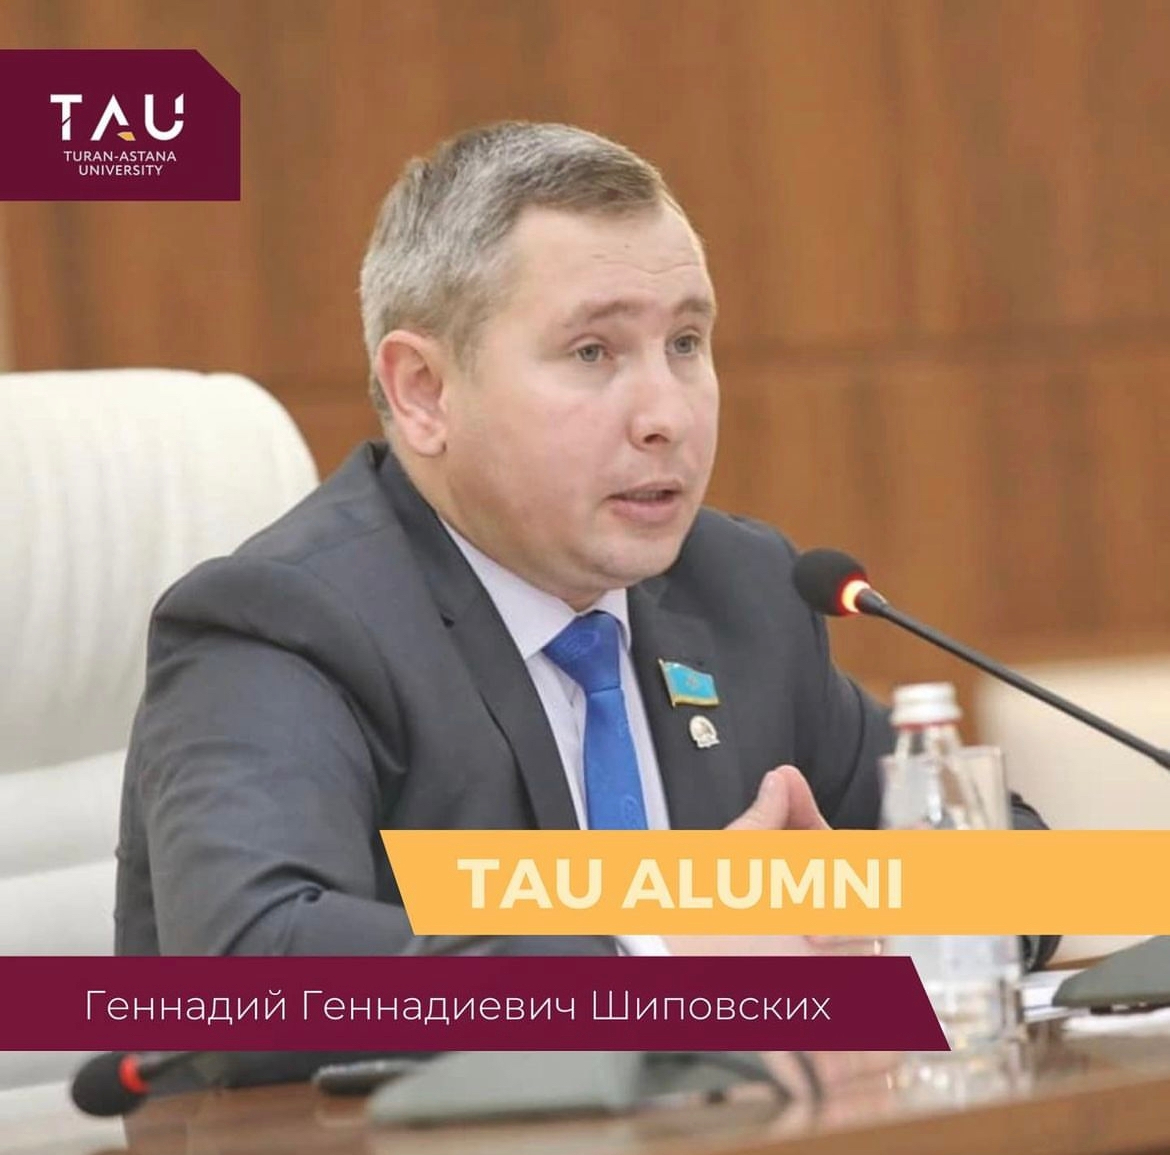 A graduate of TAU was appointed a deputy of the Senate of the Parliament of the Republic of Kazakhstan.